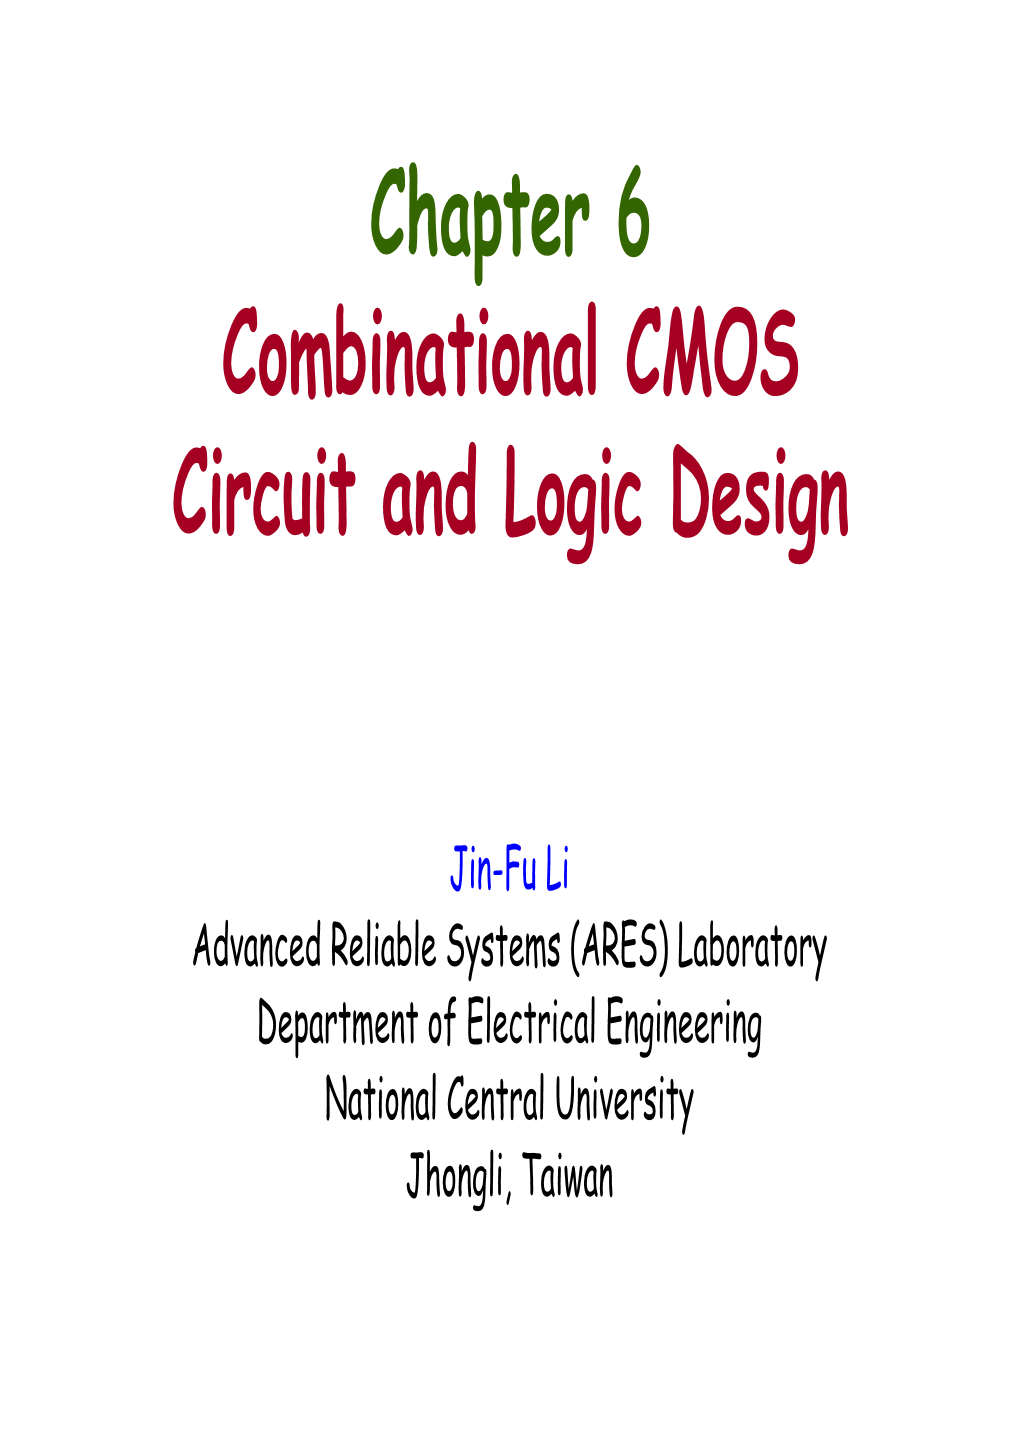 Chapter 6 Combinational CMOS Circuit and Logic Design